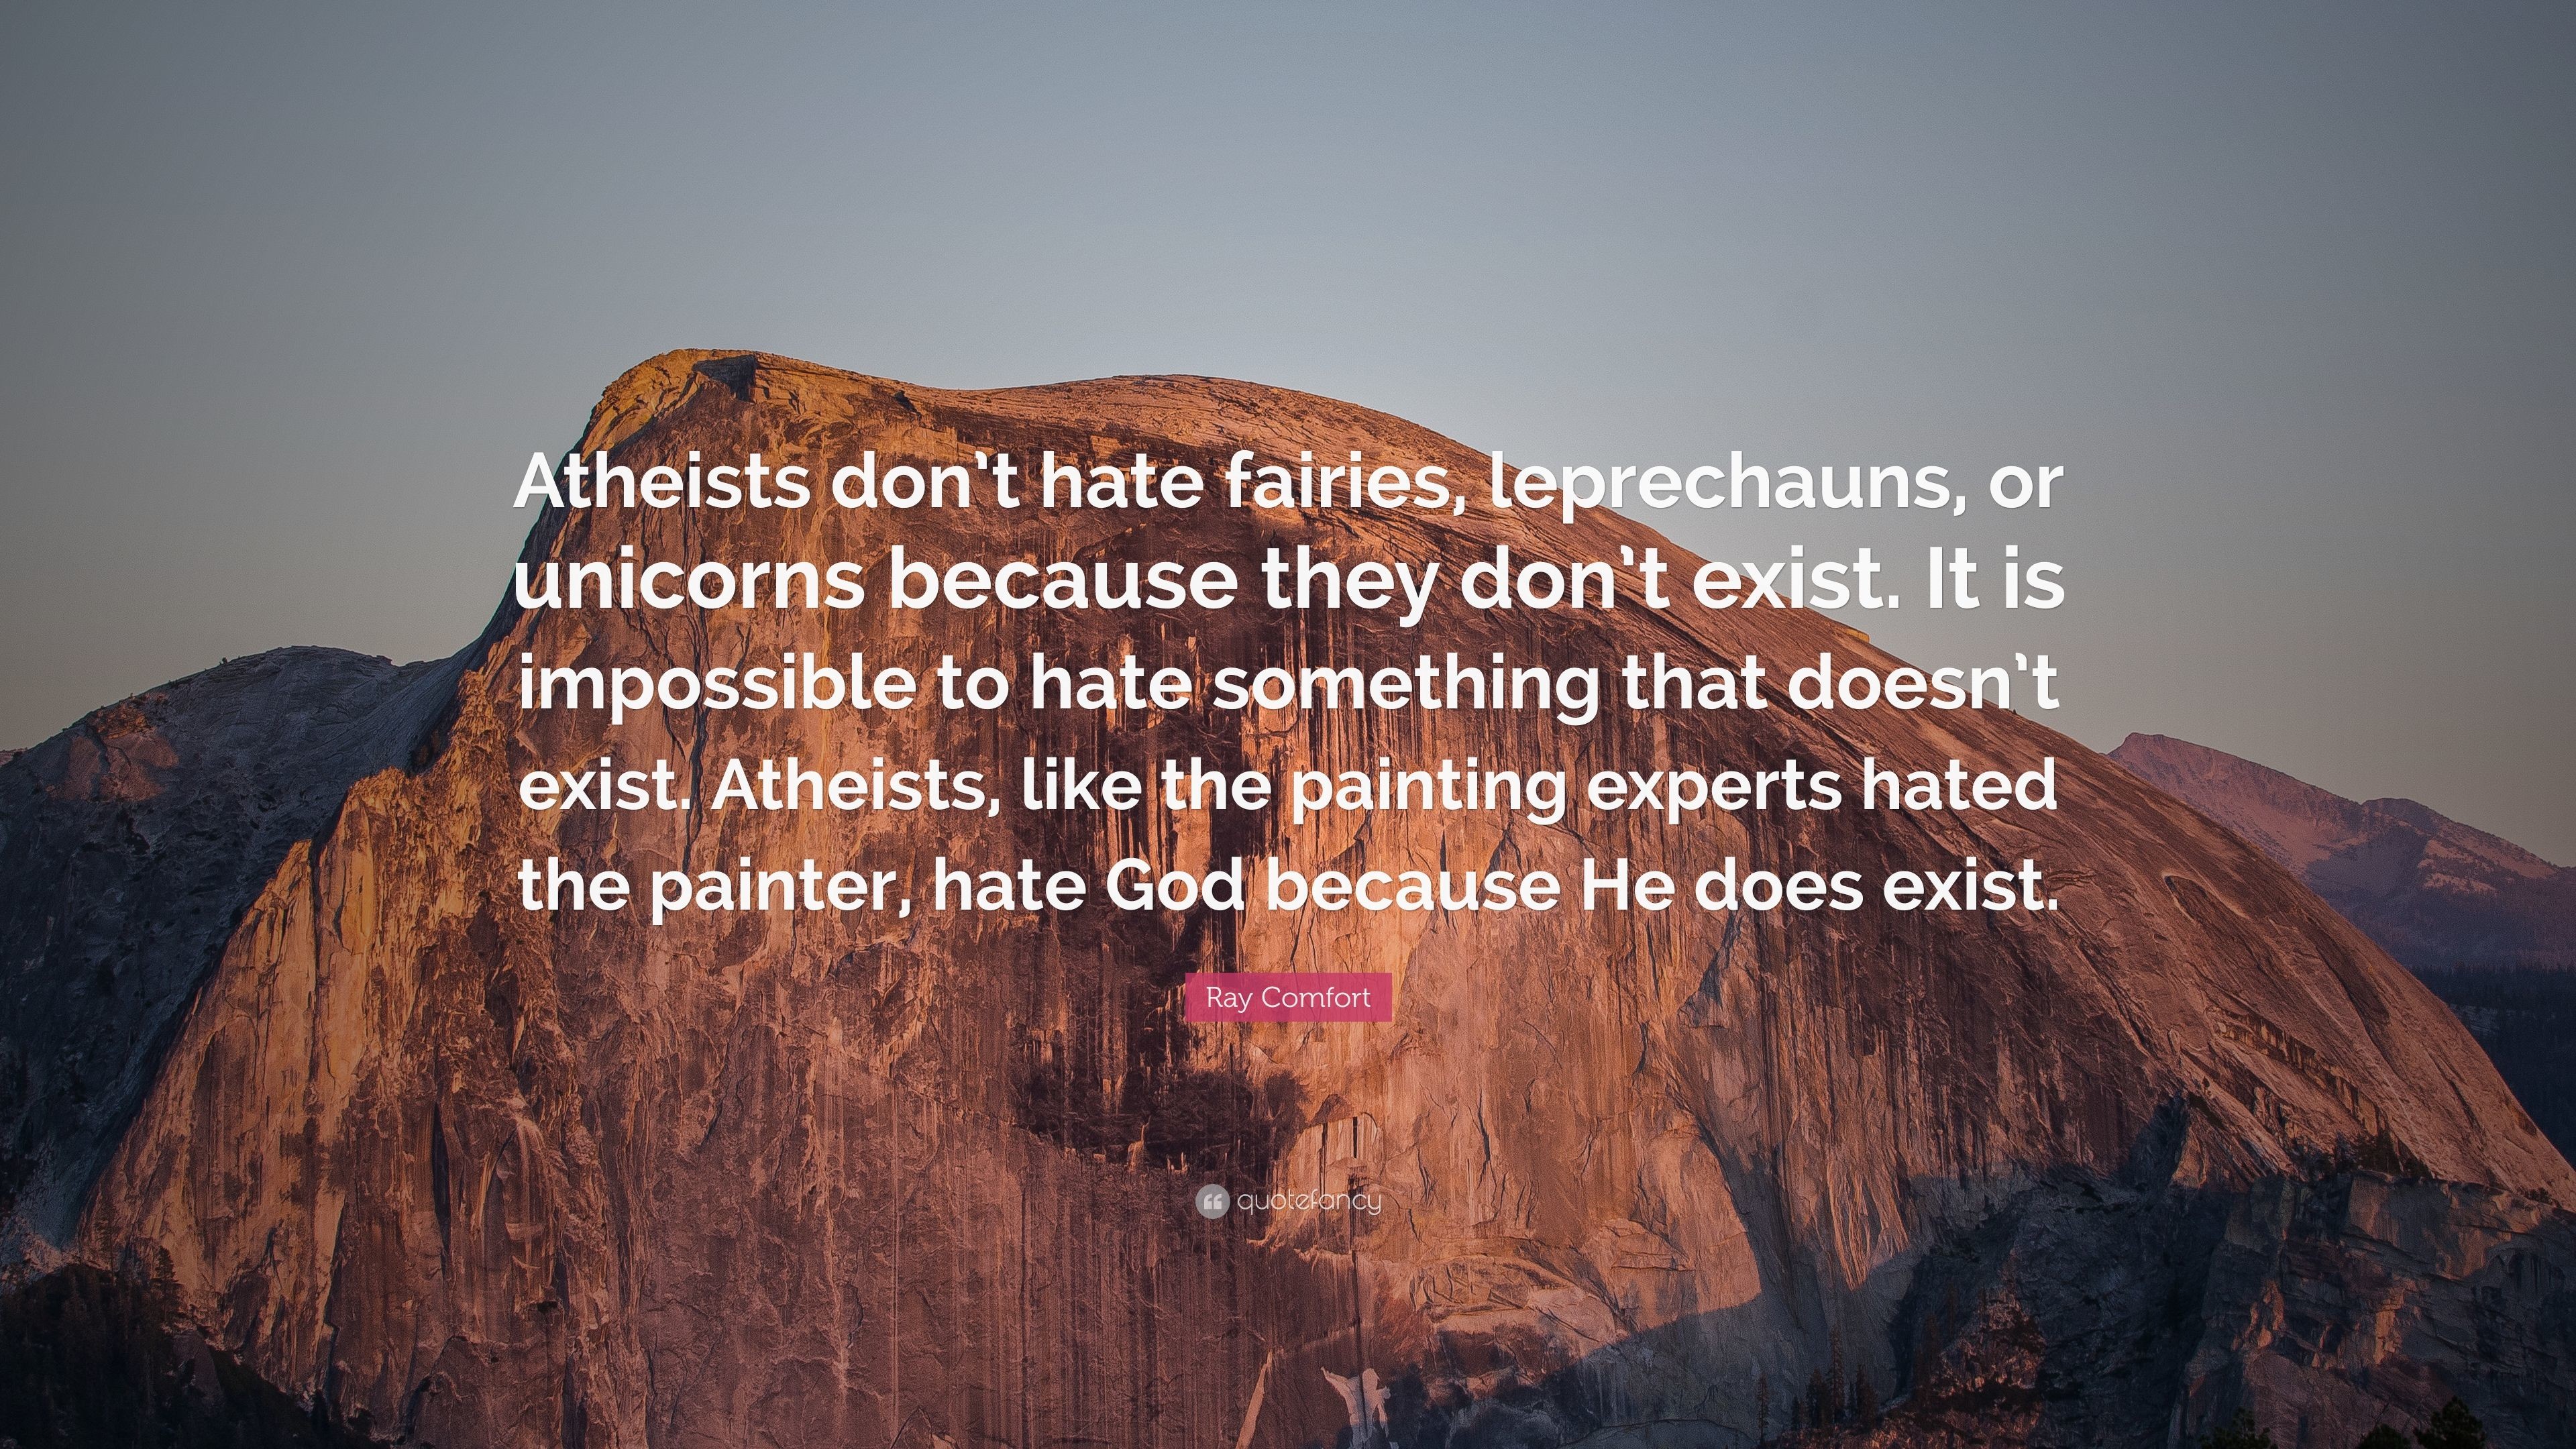 3840x2160 Ray Comfort Quote: “Atheists don't hate fairies, leprechauns, or unicorns